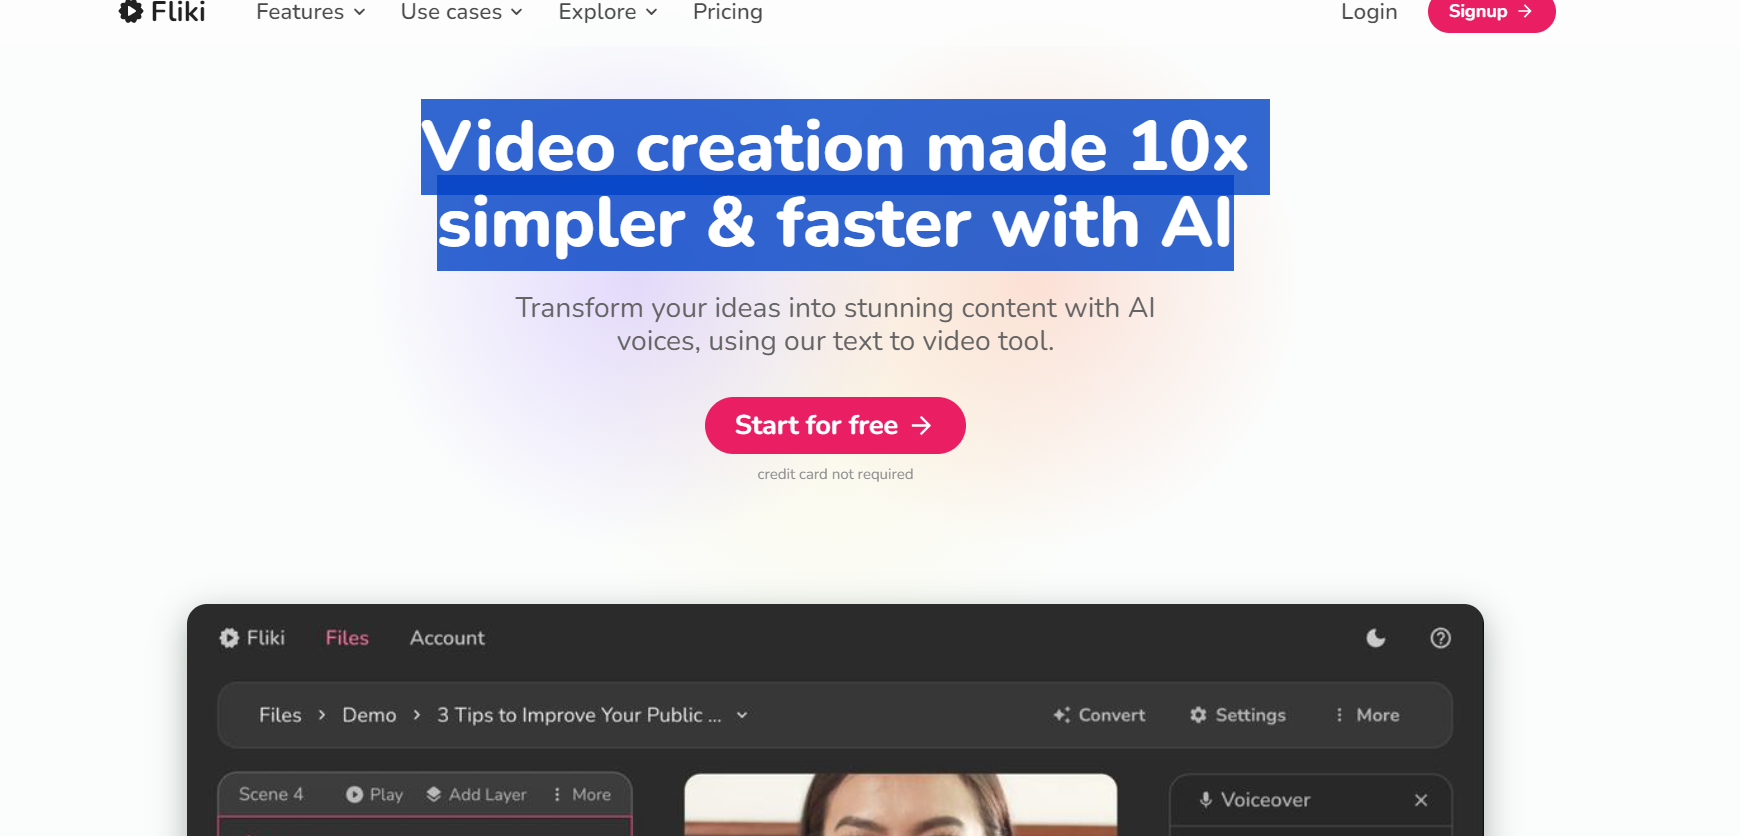 Video creation made 10x simpler & faster with Fliki.ai